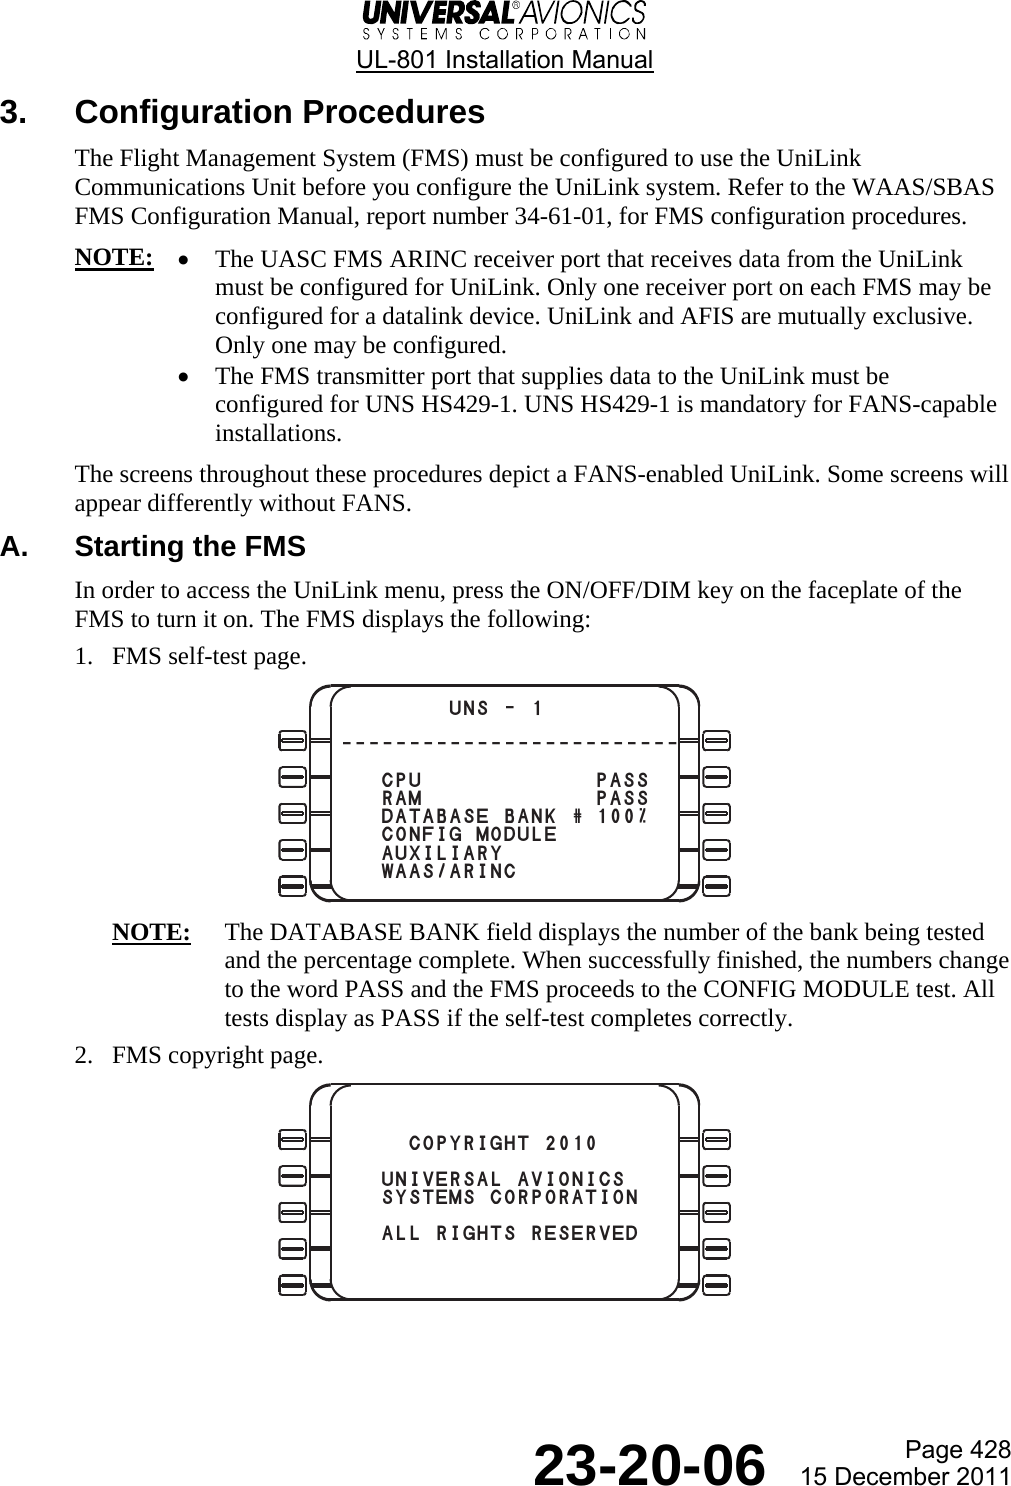  UL-801 Installation Manual  Page 428  23-20-06  15 December 2011 3. Configuration Procedures The Flight Management System (FMS) must be configured to use the UniLink Communications Unit before you configure the UniLink system. Refer to the WAAS/SBAS FMS Configuration Manual, report number 34-61-01, for FMS configuration procedures. NOTE: • The UASC FMS ARINC receiver port that receives data from the UniLink must be configured for UniLink. Only one receiver port on each FMS may be configured for a datalink device. UniLink and AFIS are mutually exclusive. Only one may be configured. • The FMS transmitter port that supplies data to the UniLink must be configured for UNS HS429-1. UNS HS429-1 is mandatory for FANS-capable installations. The screens throughout these procedures depict a FANS-enabled UniLink. Some screens will appear differently without FANS. A.  Starting the FMS In order to access the UniLink menu, press the ON/OFF/DIM key on the faceplate of the FMS to turn it on. The FMS displays the following: 1. FMS self-test page.  NOTE:  The DATABASE BANK field displays the number of the bank being tested and the percentage complete. When successfully finished, the numbers change to the word PASS and the FMS proceeds to the CONFIG MODULE test. All tests display as PASS if the self-test completes correctly. 2. FMS copyright page.          UNS - 1-------------------------   CPU PASS   RAM PASS   DATABASE BANK # 100%   CONFIG MODULE   AUXILIARY   WAAS/ARINC     COPYRIGHT 2010   UNIVERSAL AVIONICS   SYSTEMS CORPORATION   ALL RIGHTS RESERVED